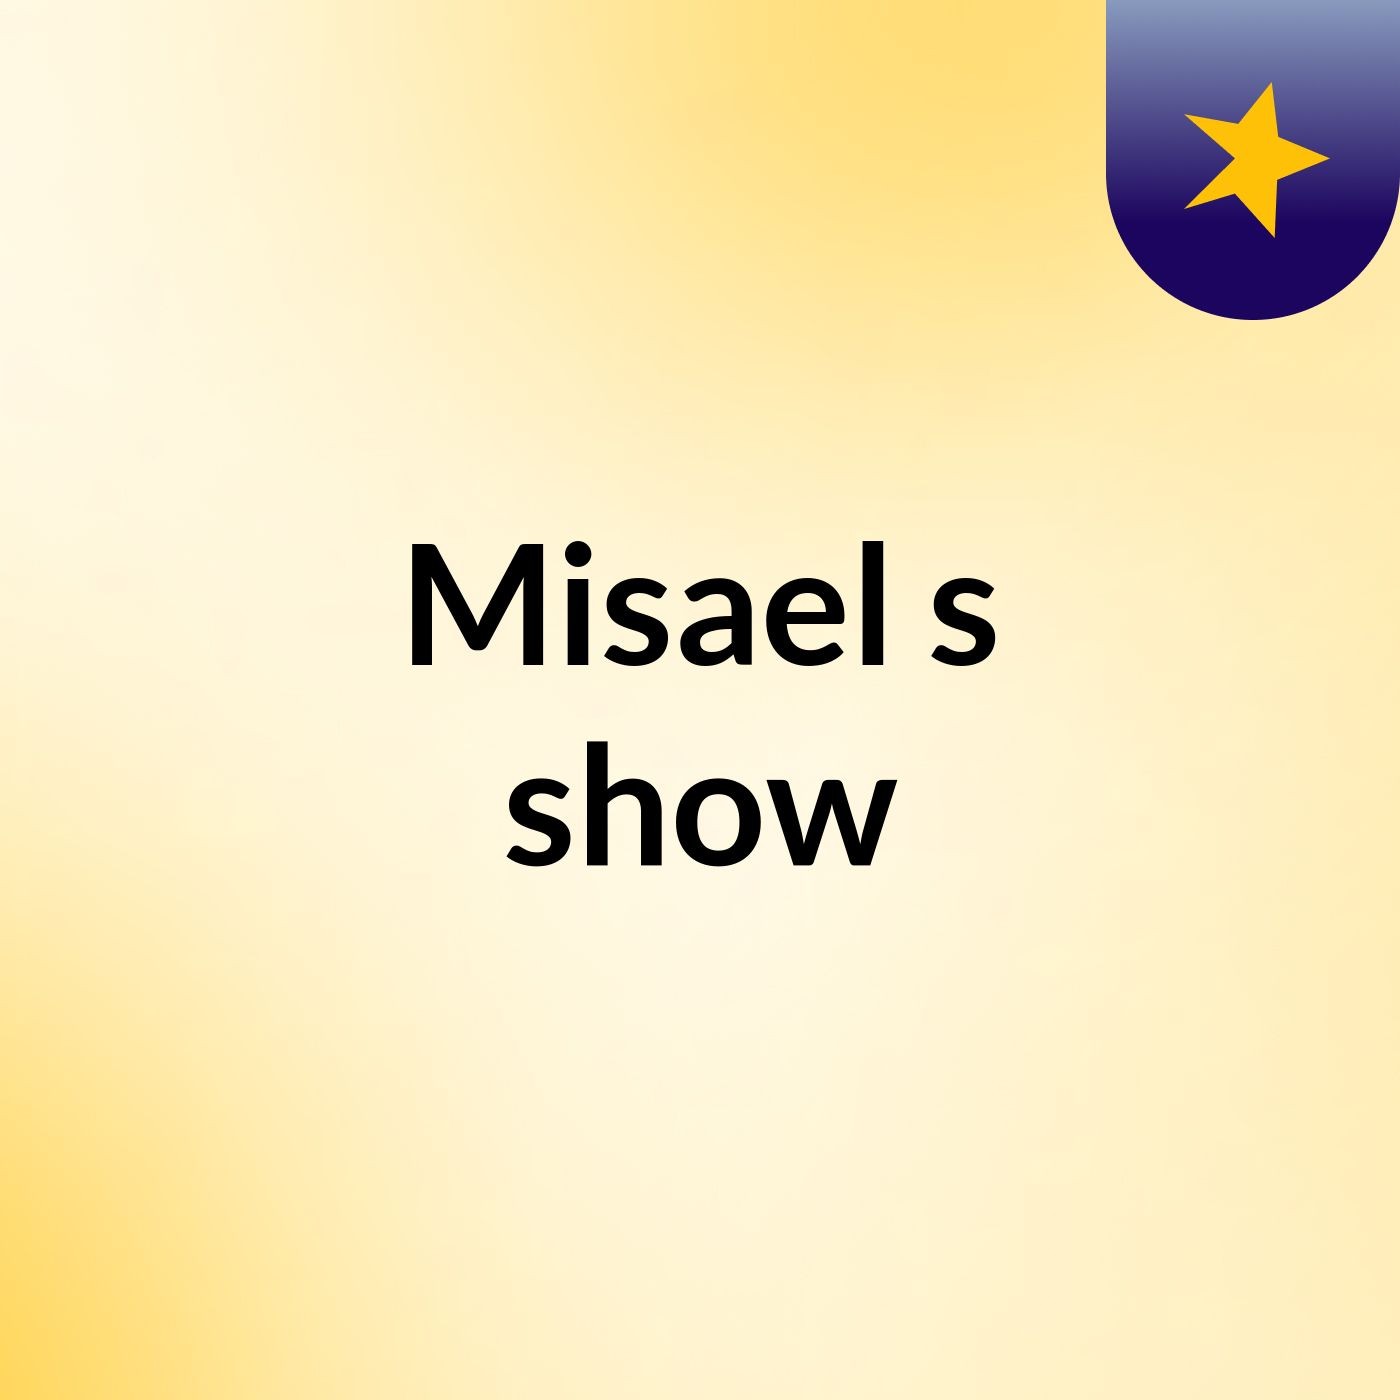 Misael's show